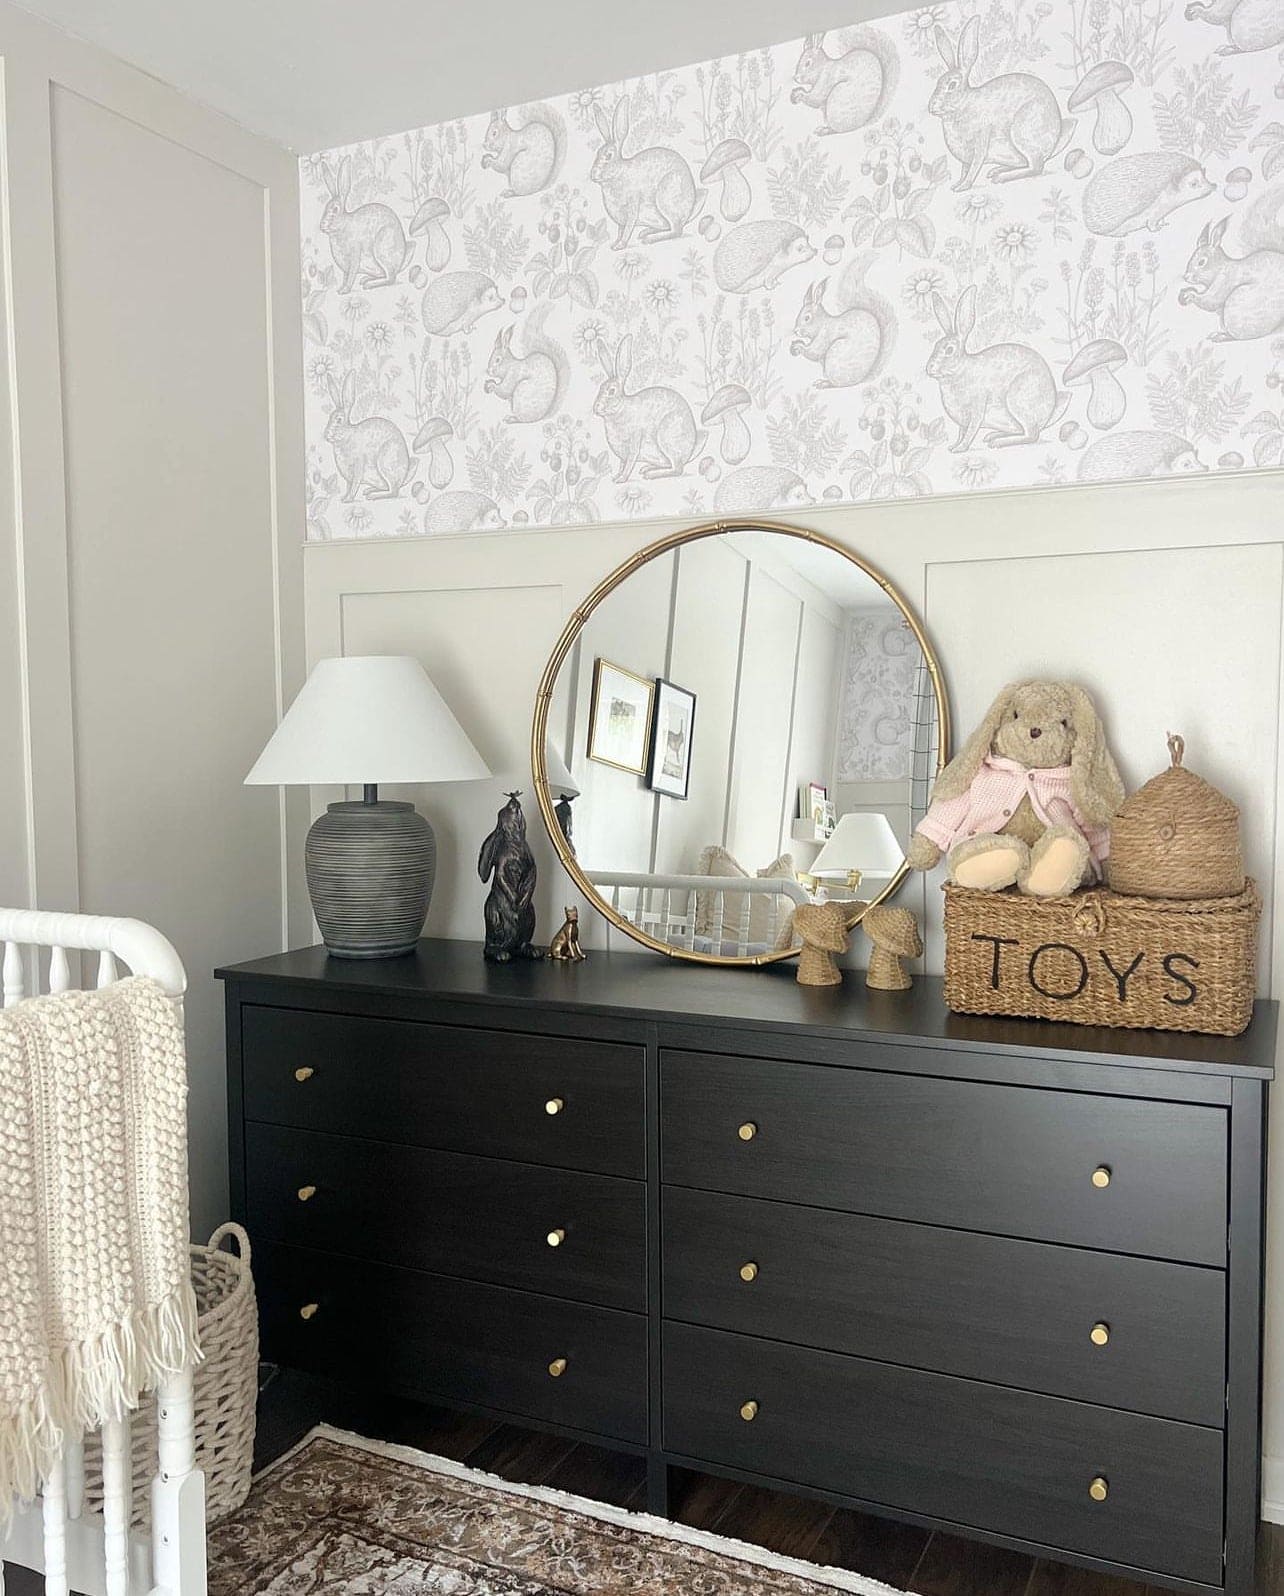 The "Woodland Creatures Wallpaper - Beige" sets a peaceful and playful backdrop in a child's room with a black dresser and a round mirror. Plush toys and a woven "TOYS" basket on the dresser match the theme, adding to the room's enchanted forest vibe.